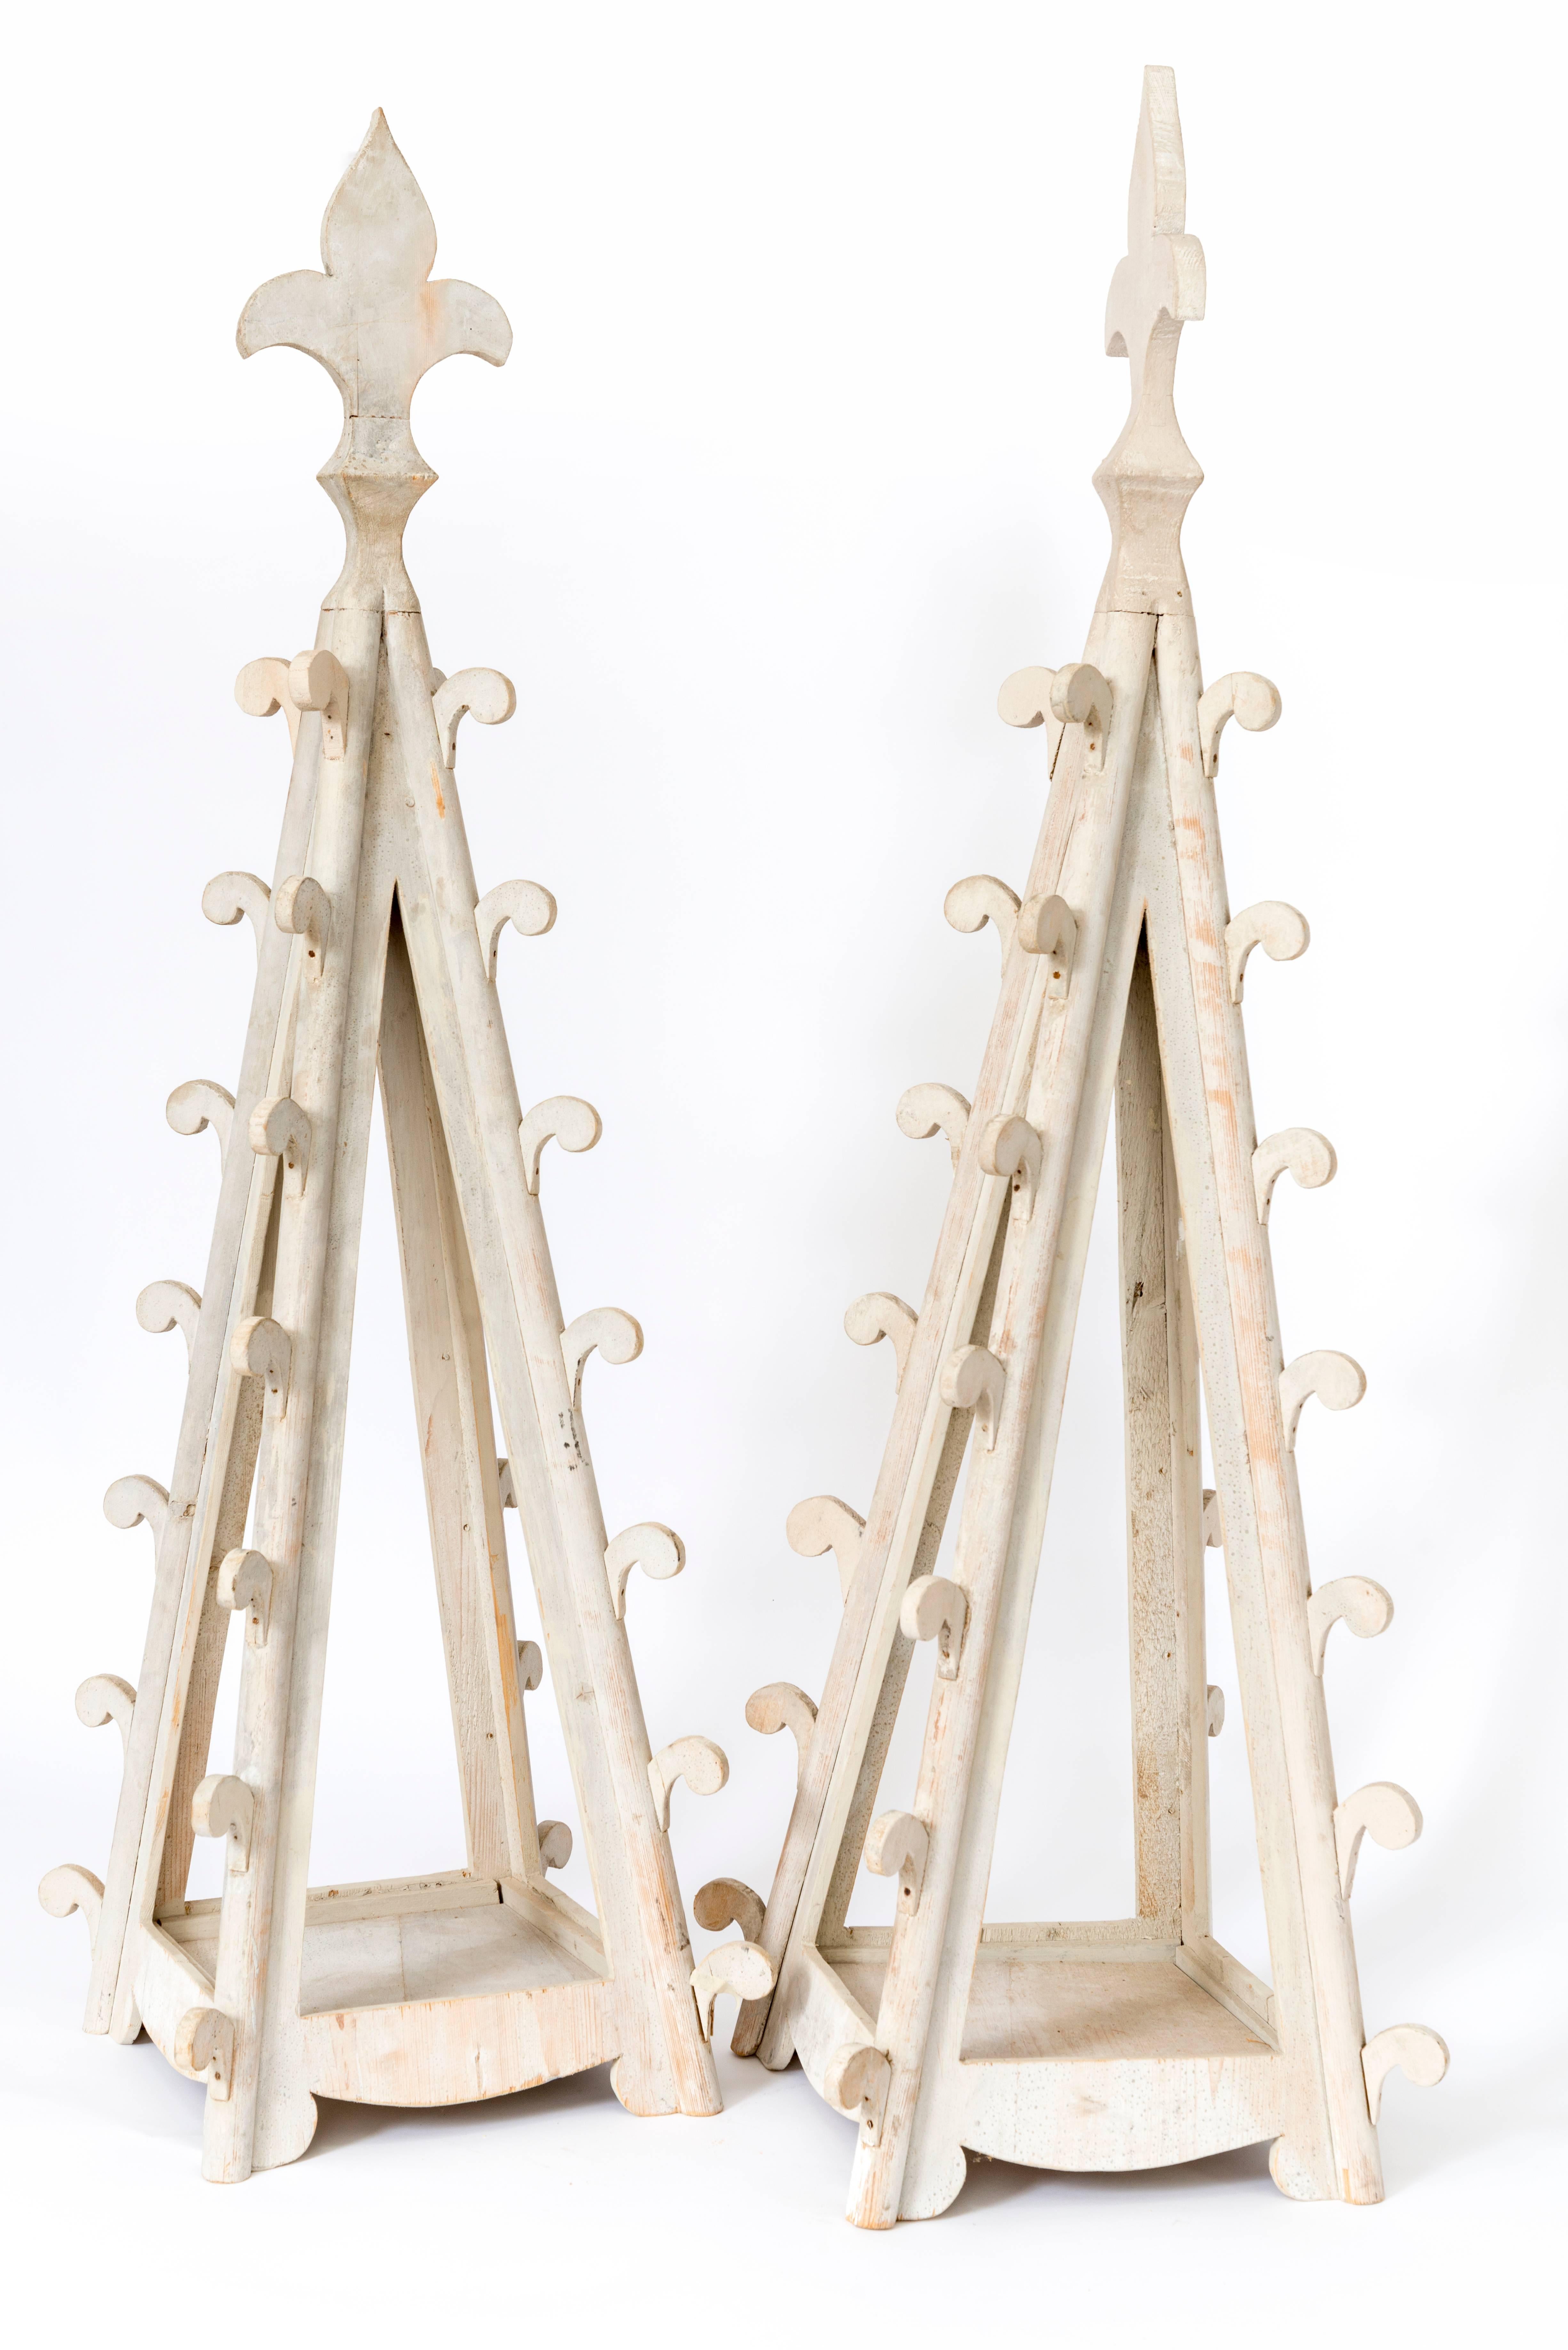 19th Century Two Pairs of Decorative Gothic Wooden Table Candleholders